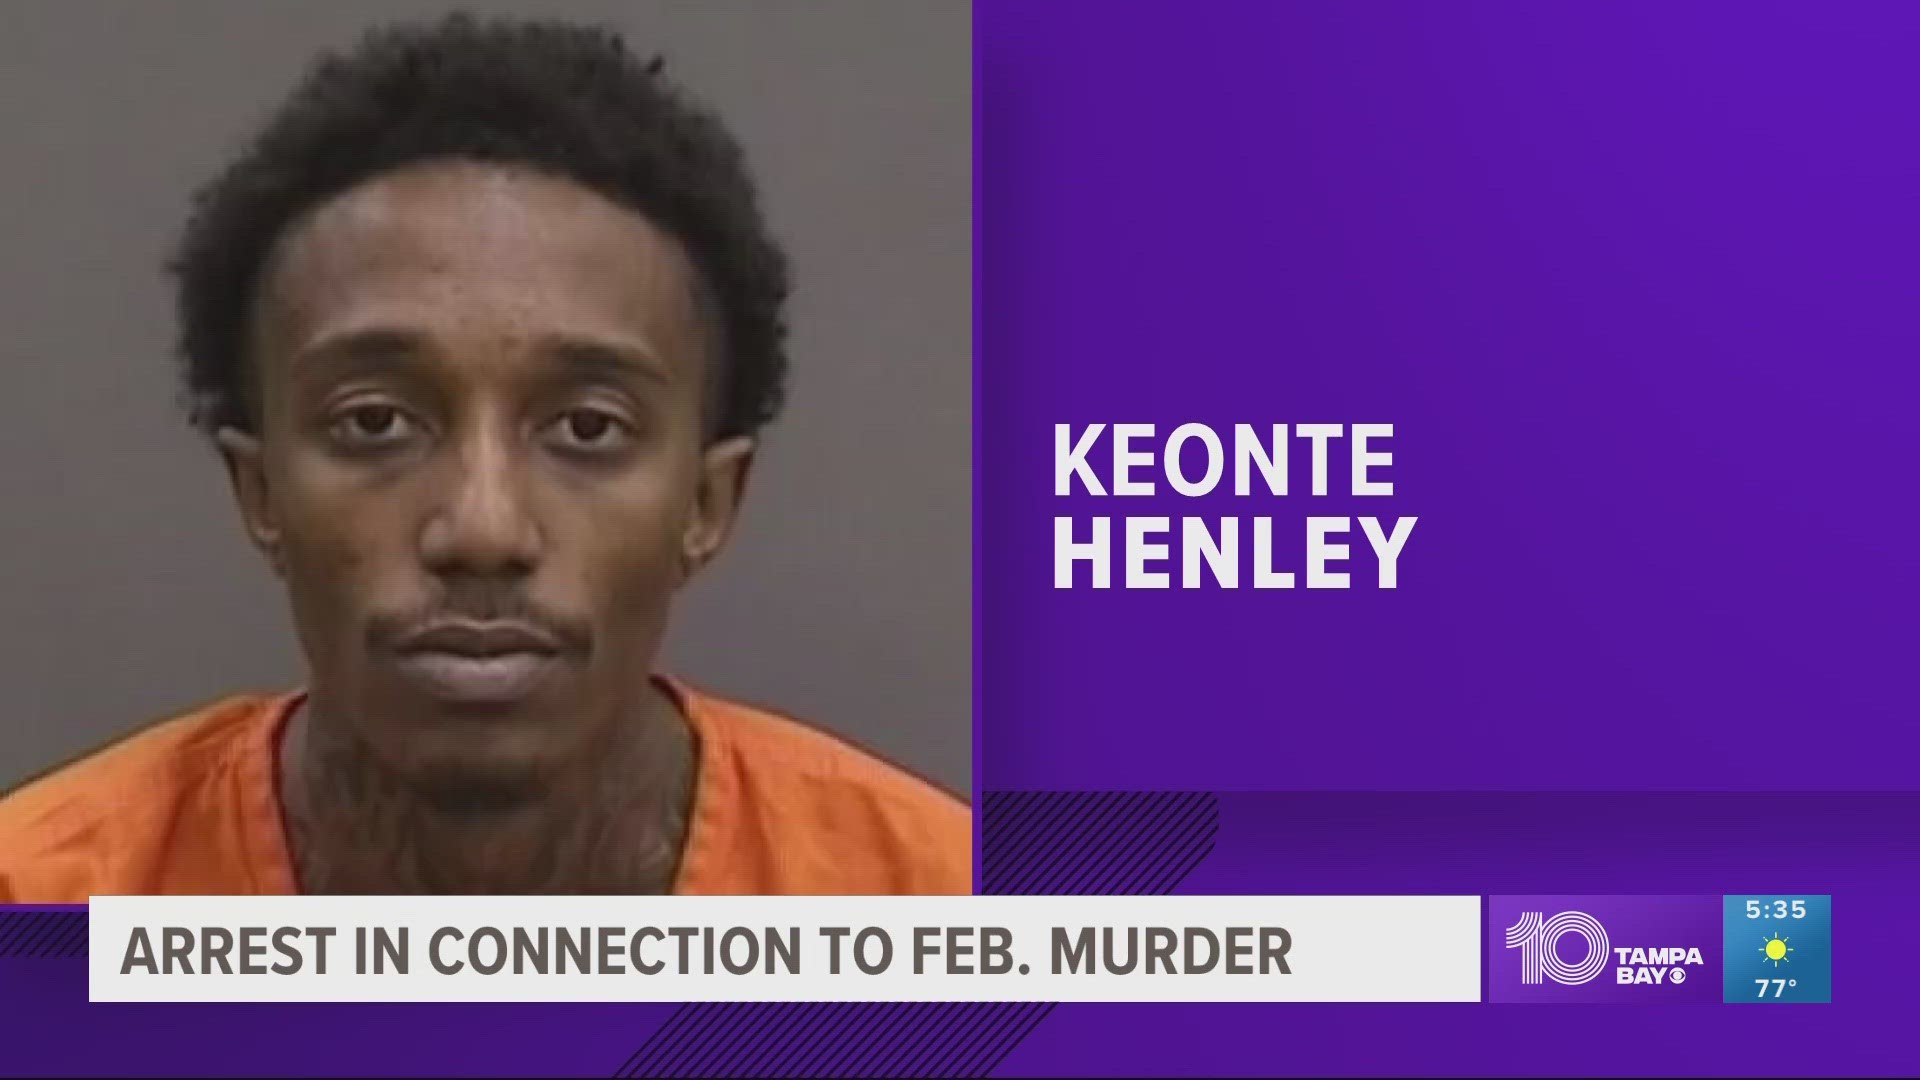 Deputies say Keonte Henley turned himself into the sheriff's office on Tuesday.